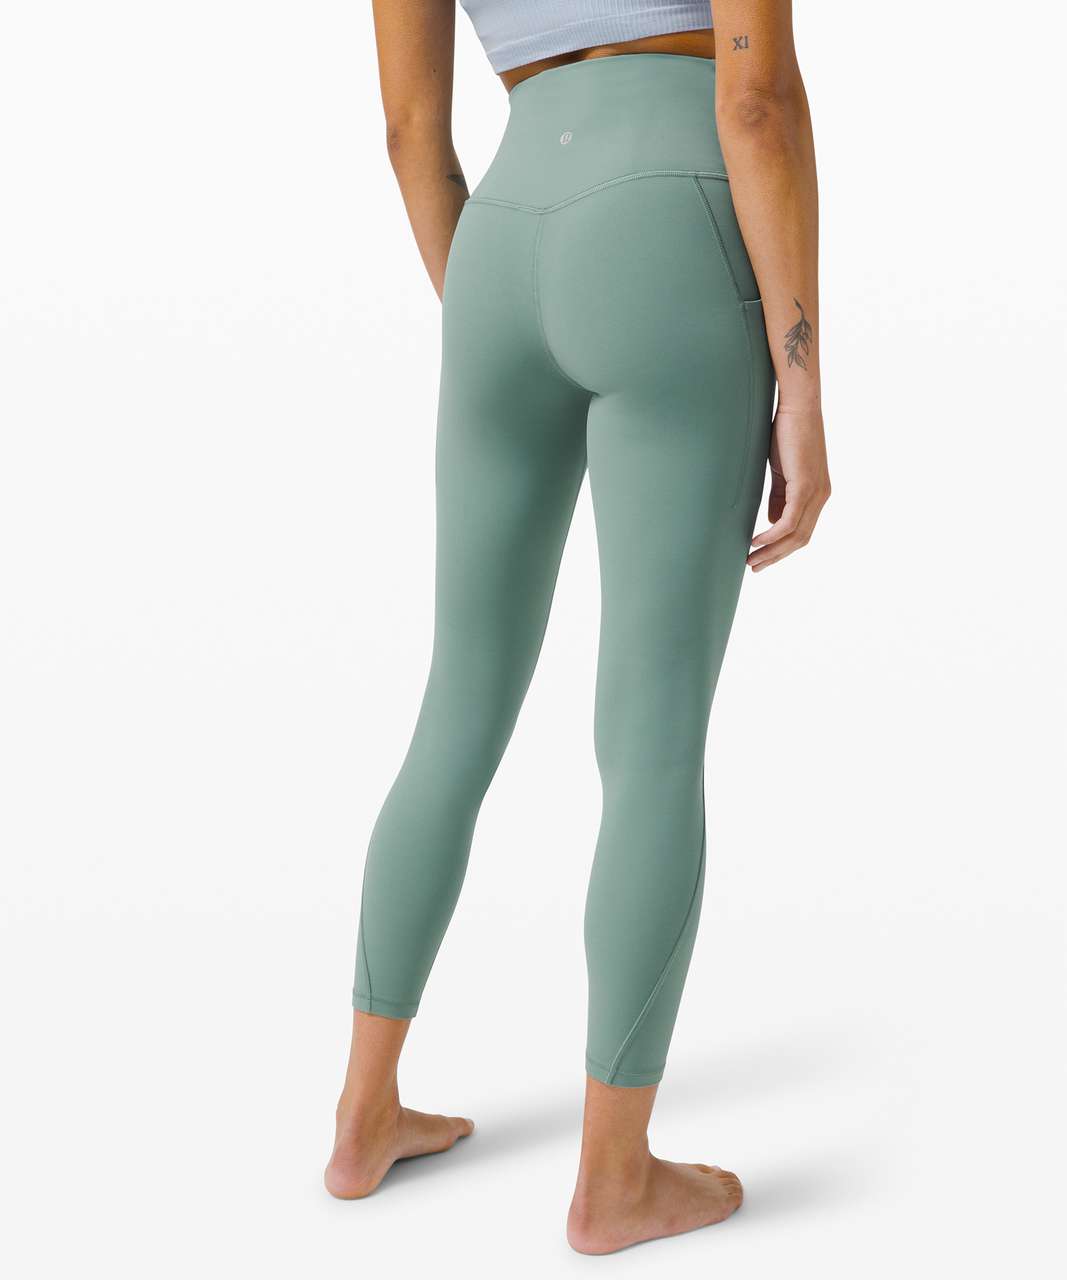 Lululemon Align High Rise Pant with Pockets 25" - Tidewater Teal